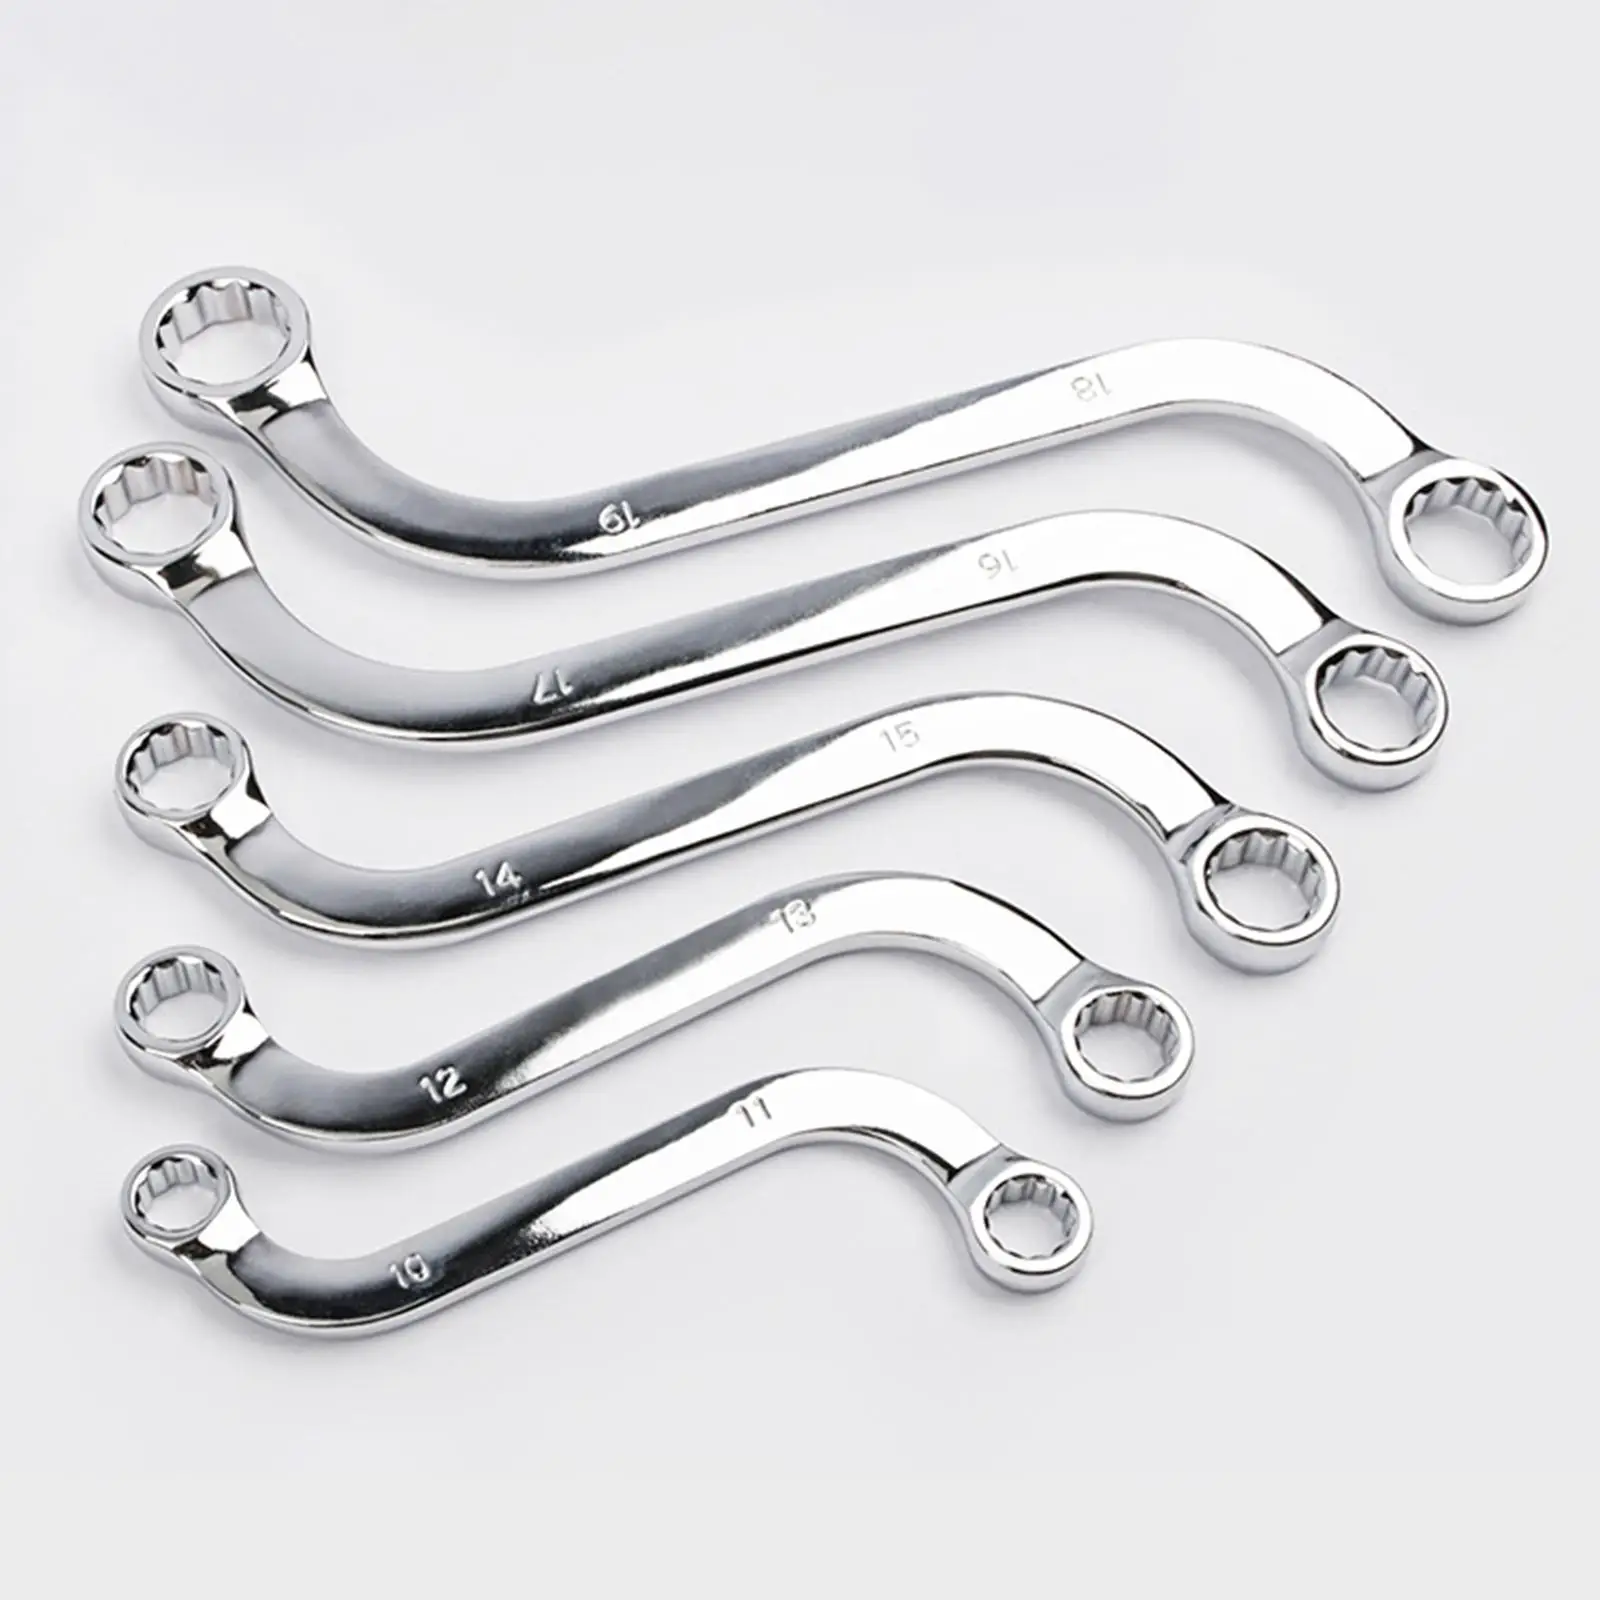 5x Multi Functional S Type Wrench Set Screw Nuts Wrench Double Sided Self Tightening for Car